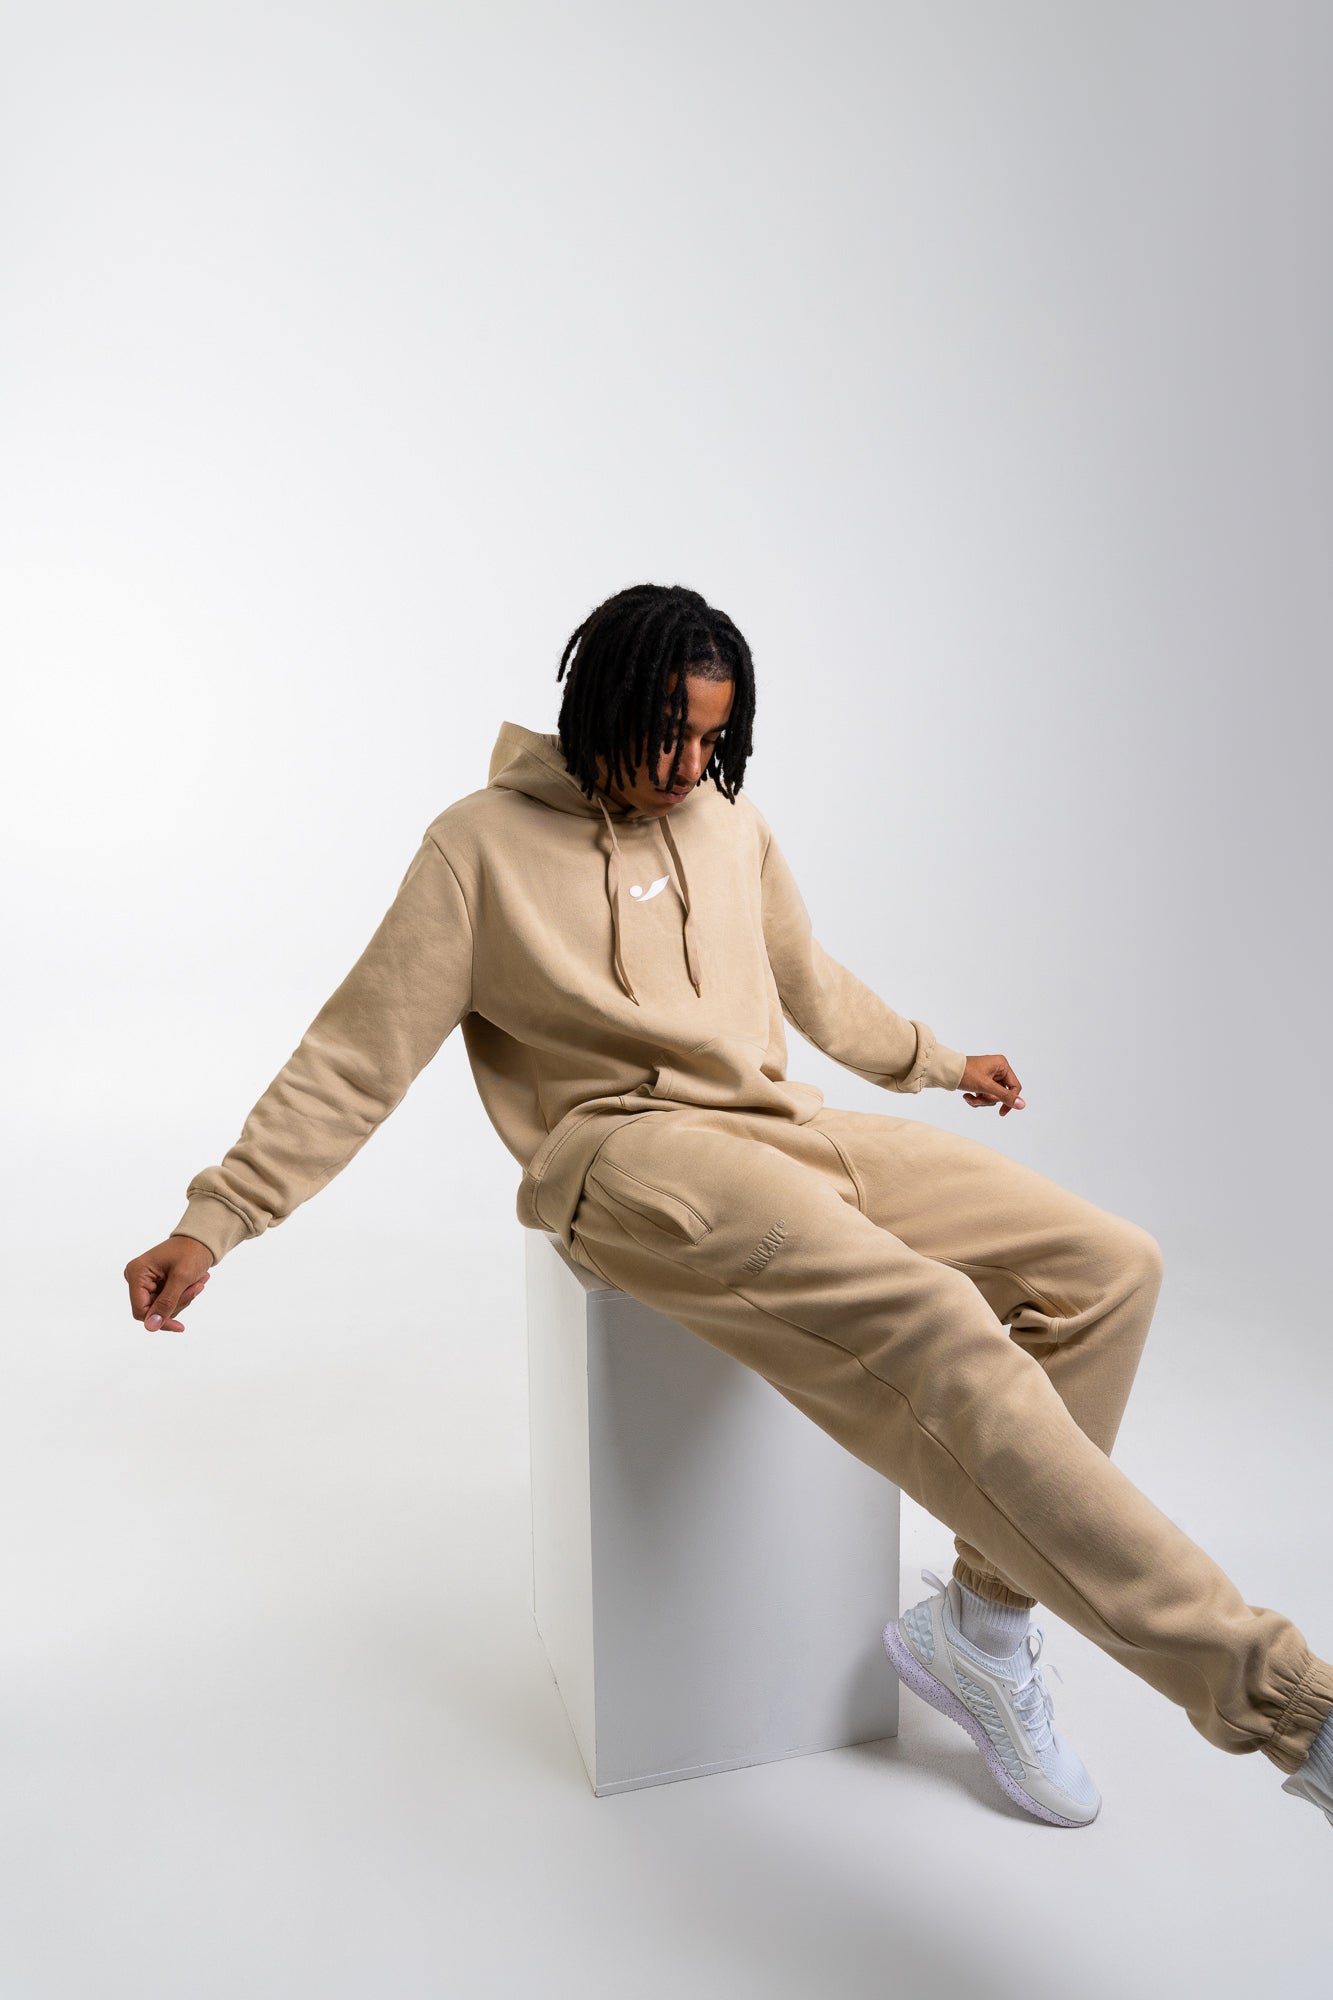 Concave Mens Pullover Hoodie - Beige/White